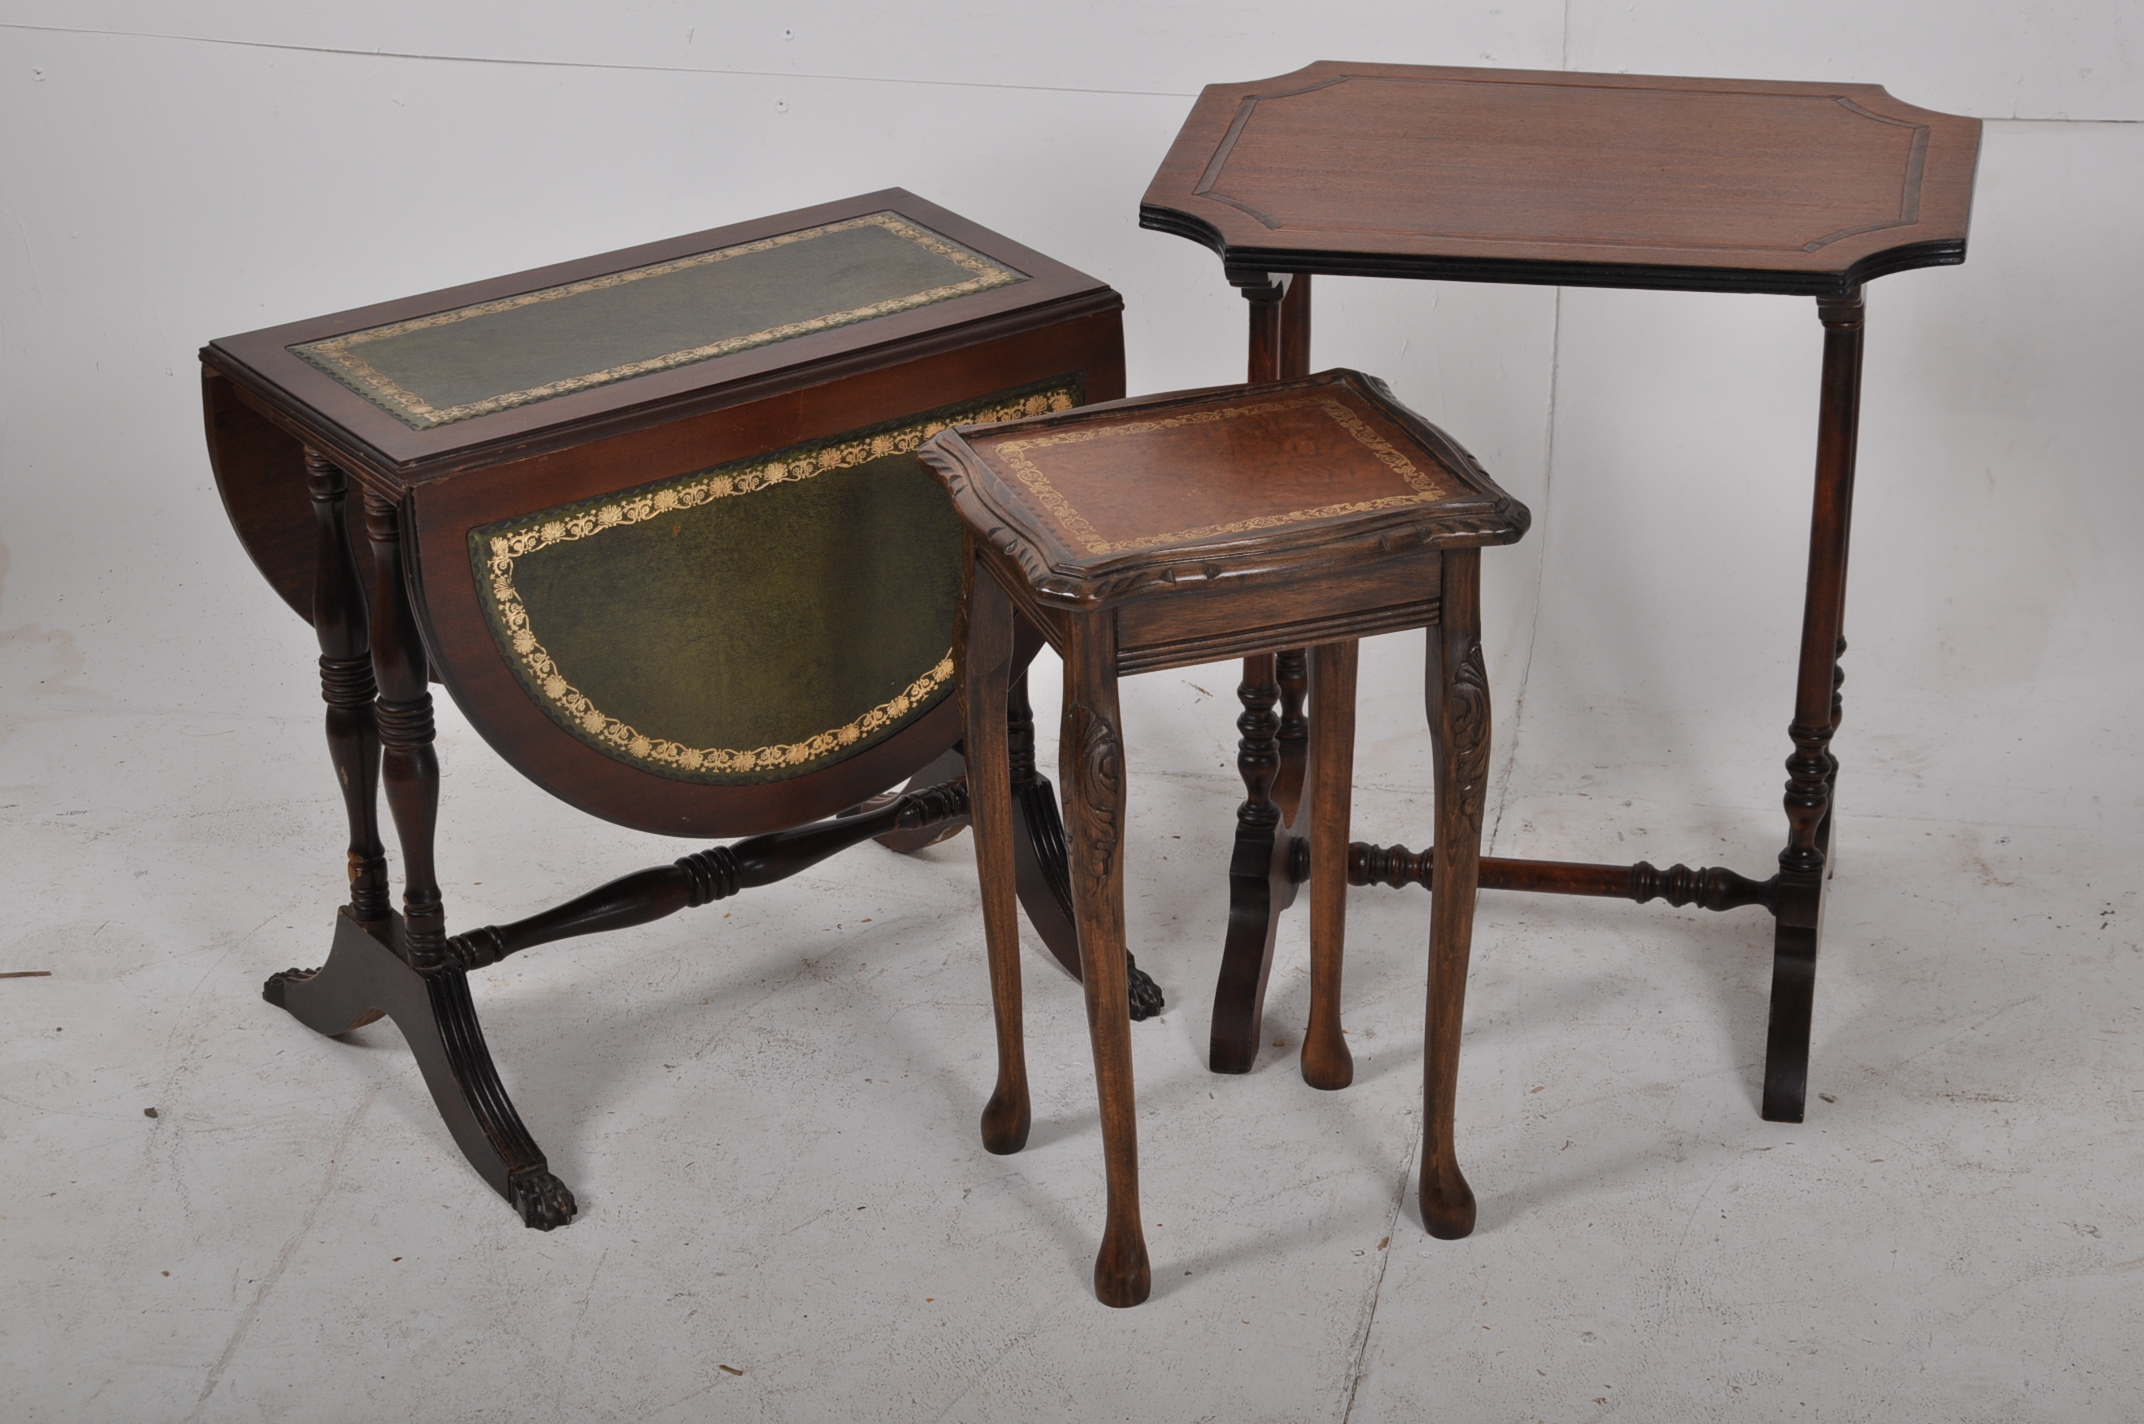 A pair of regency style reproduction mahogany side tables, together with another